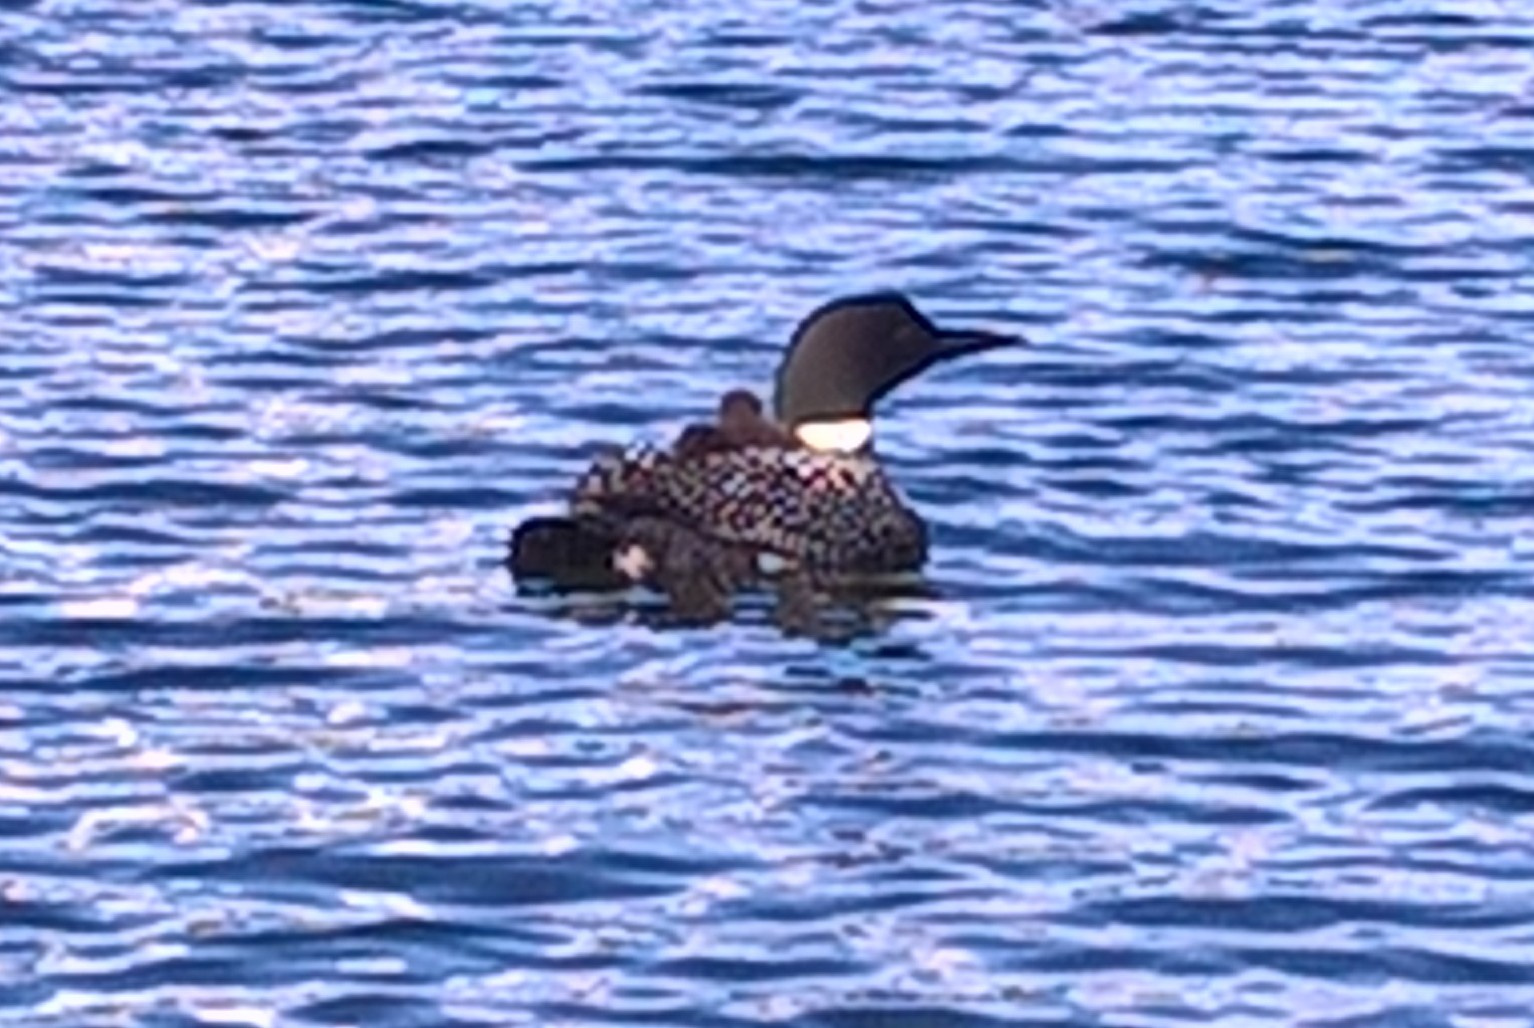 The pair of loons have added two more to their family.